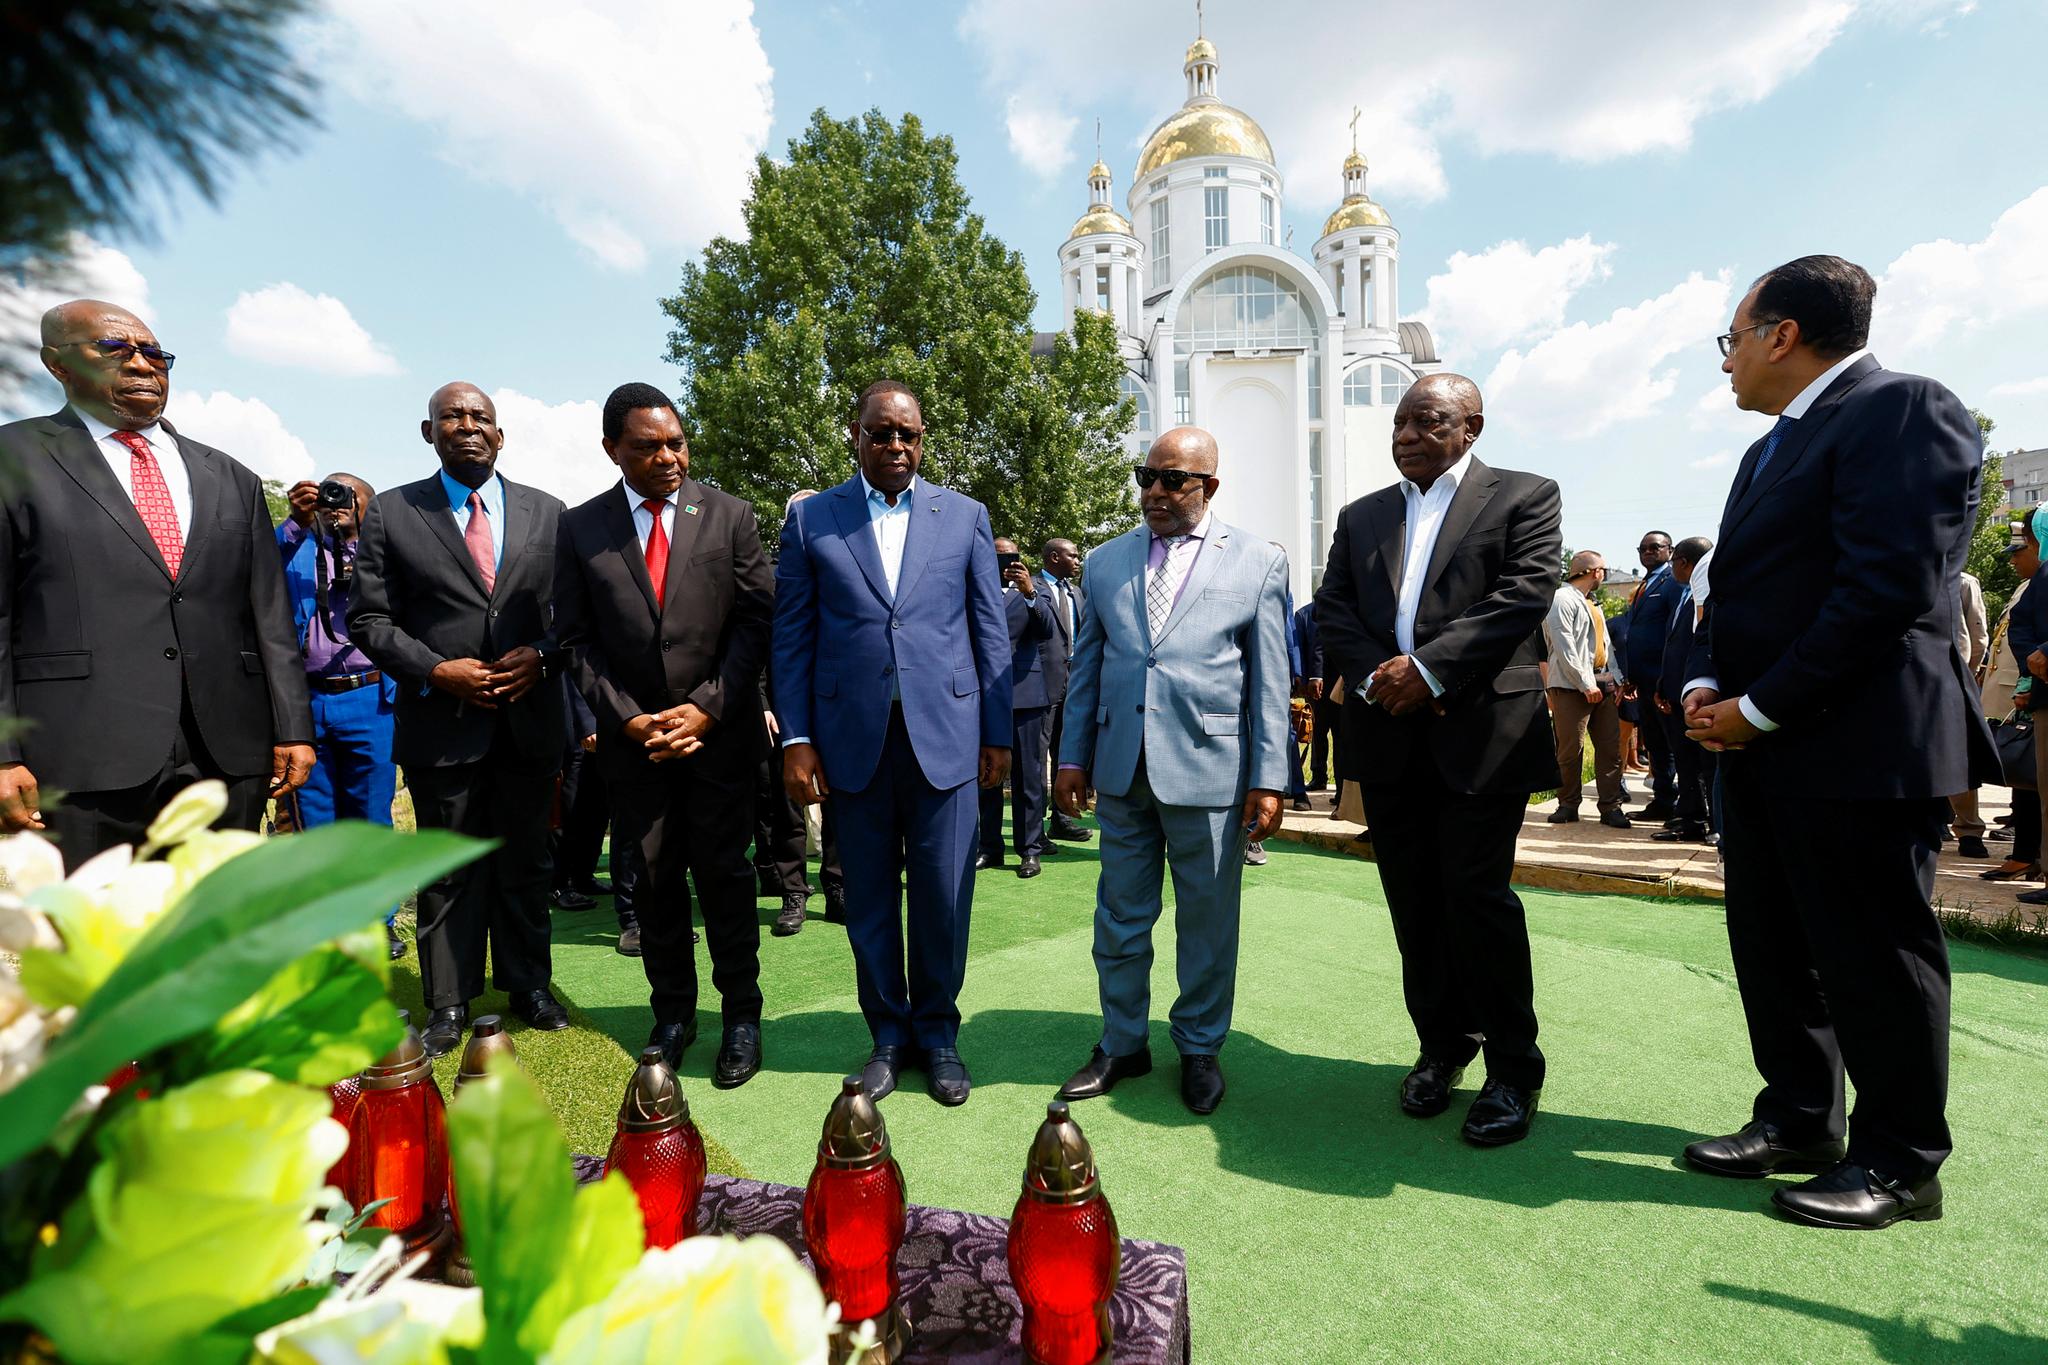 Air raid warning and report of explosion in Kyiv during visit of African heads of state